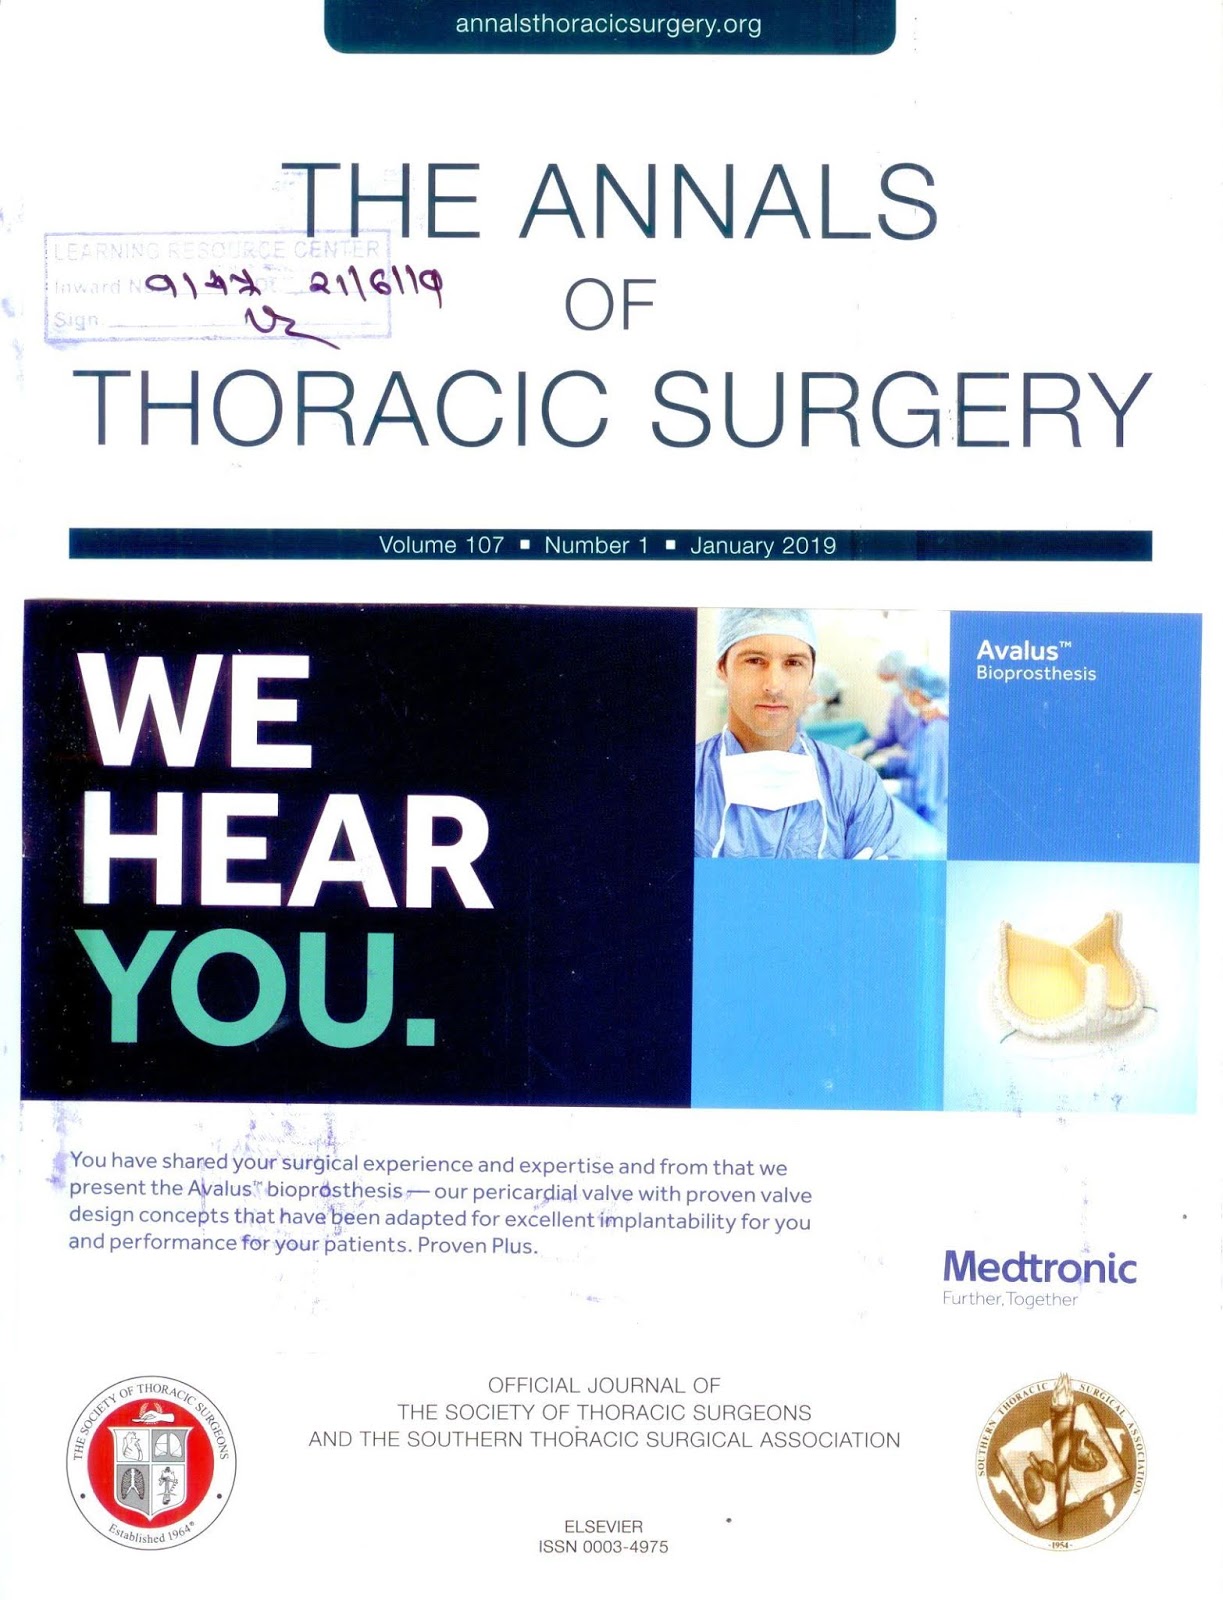 https://www.annalsthoracicsurgery.org/issue/S0003-4975(18)X0011-3